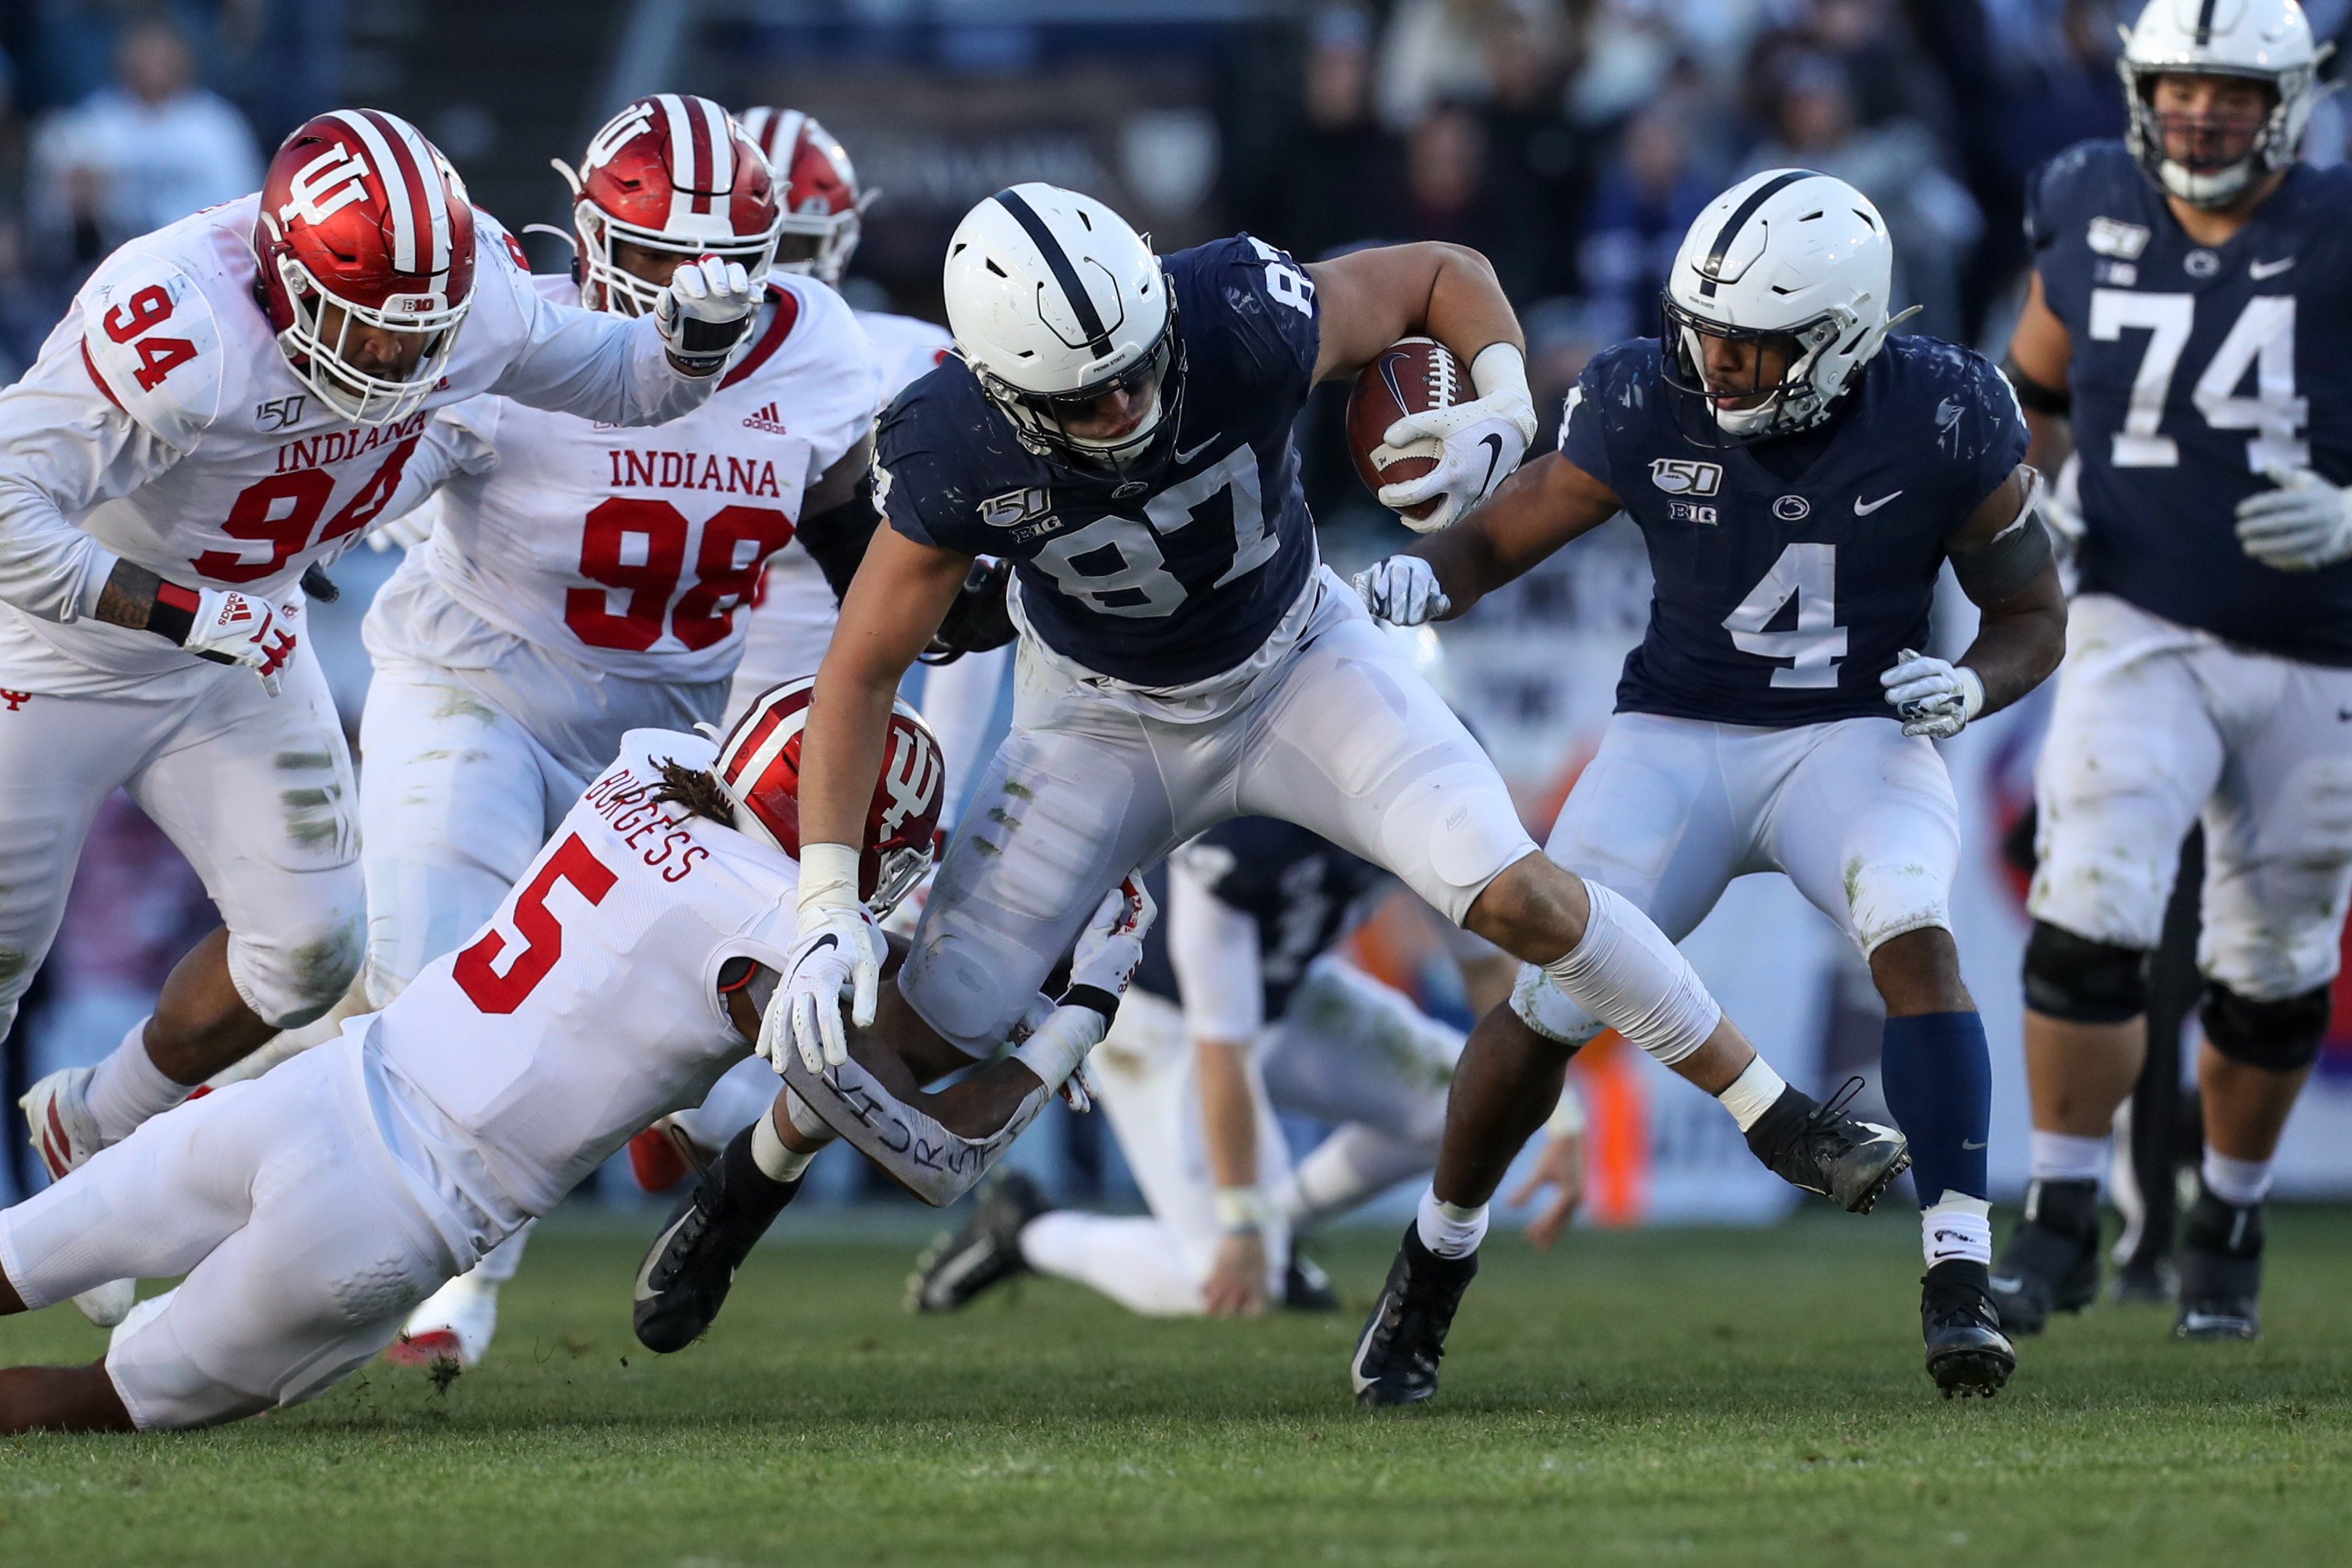 Podcast: Where will Penn State be ranked in the playoff poll tonight?